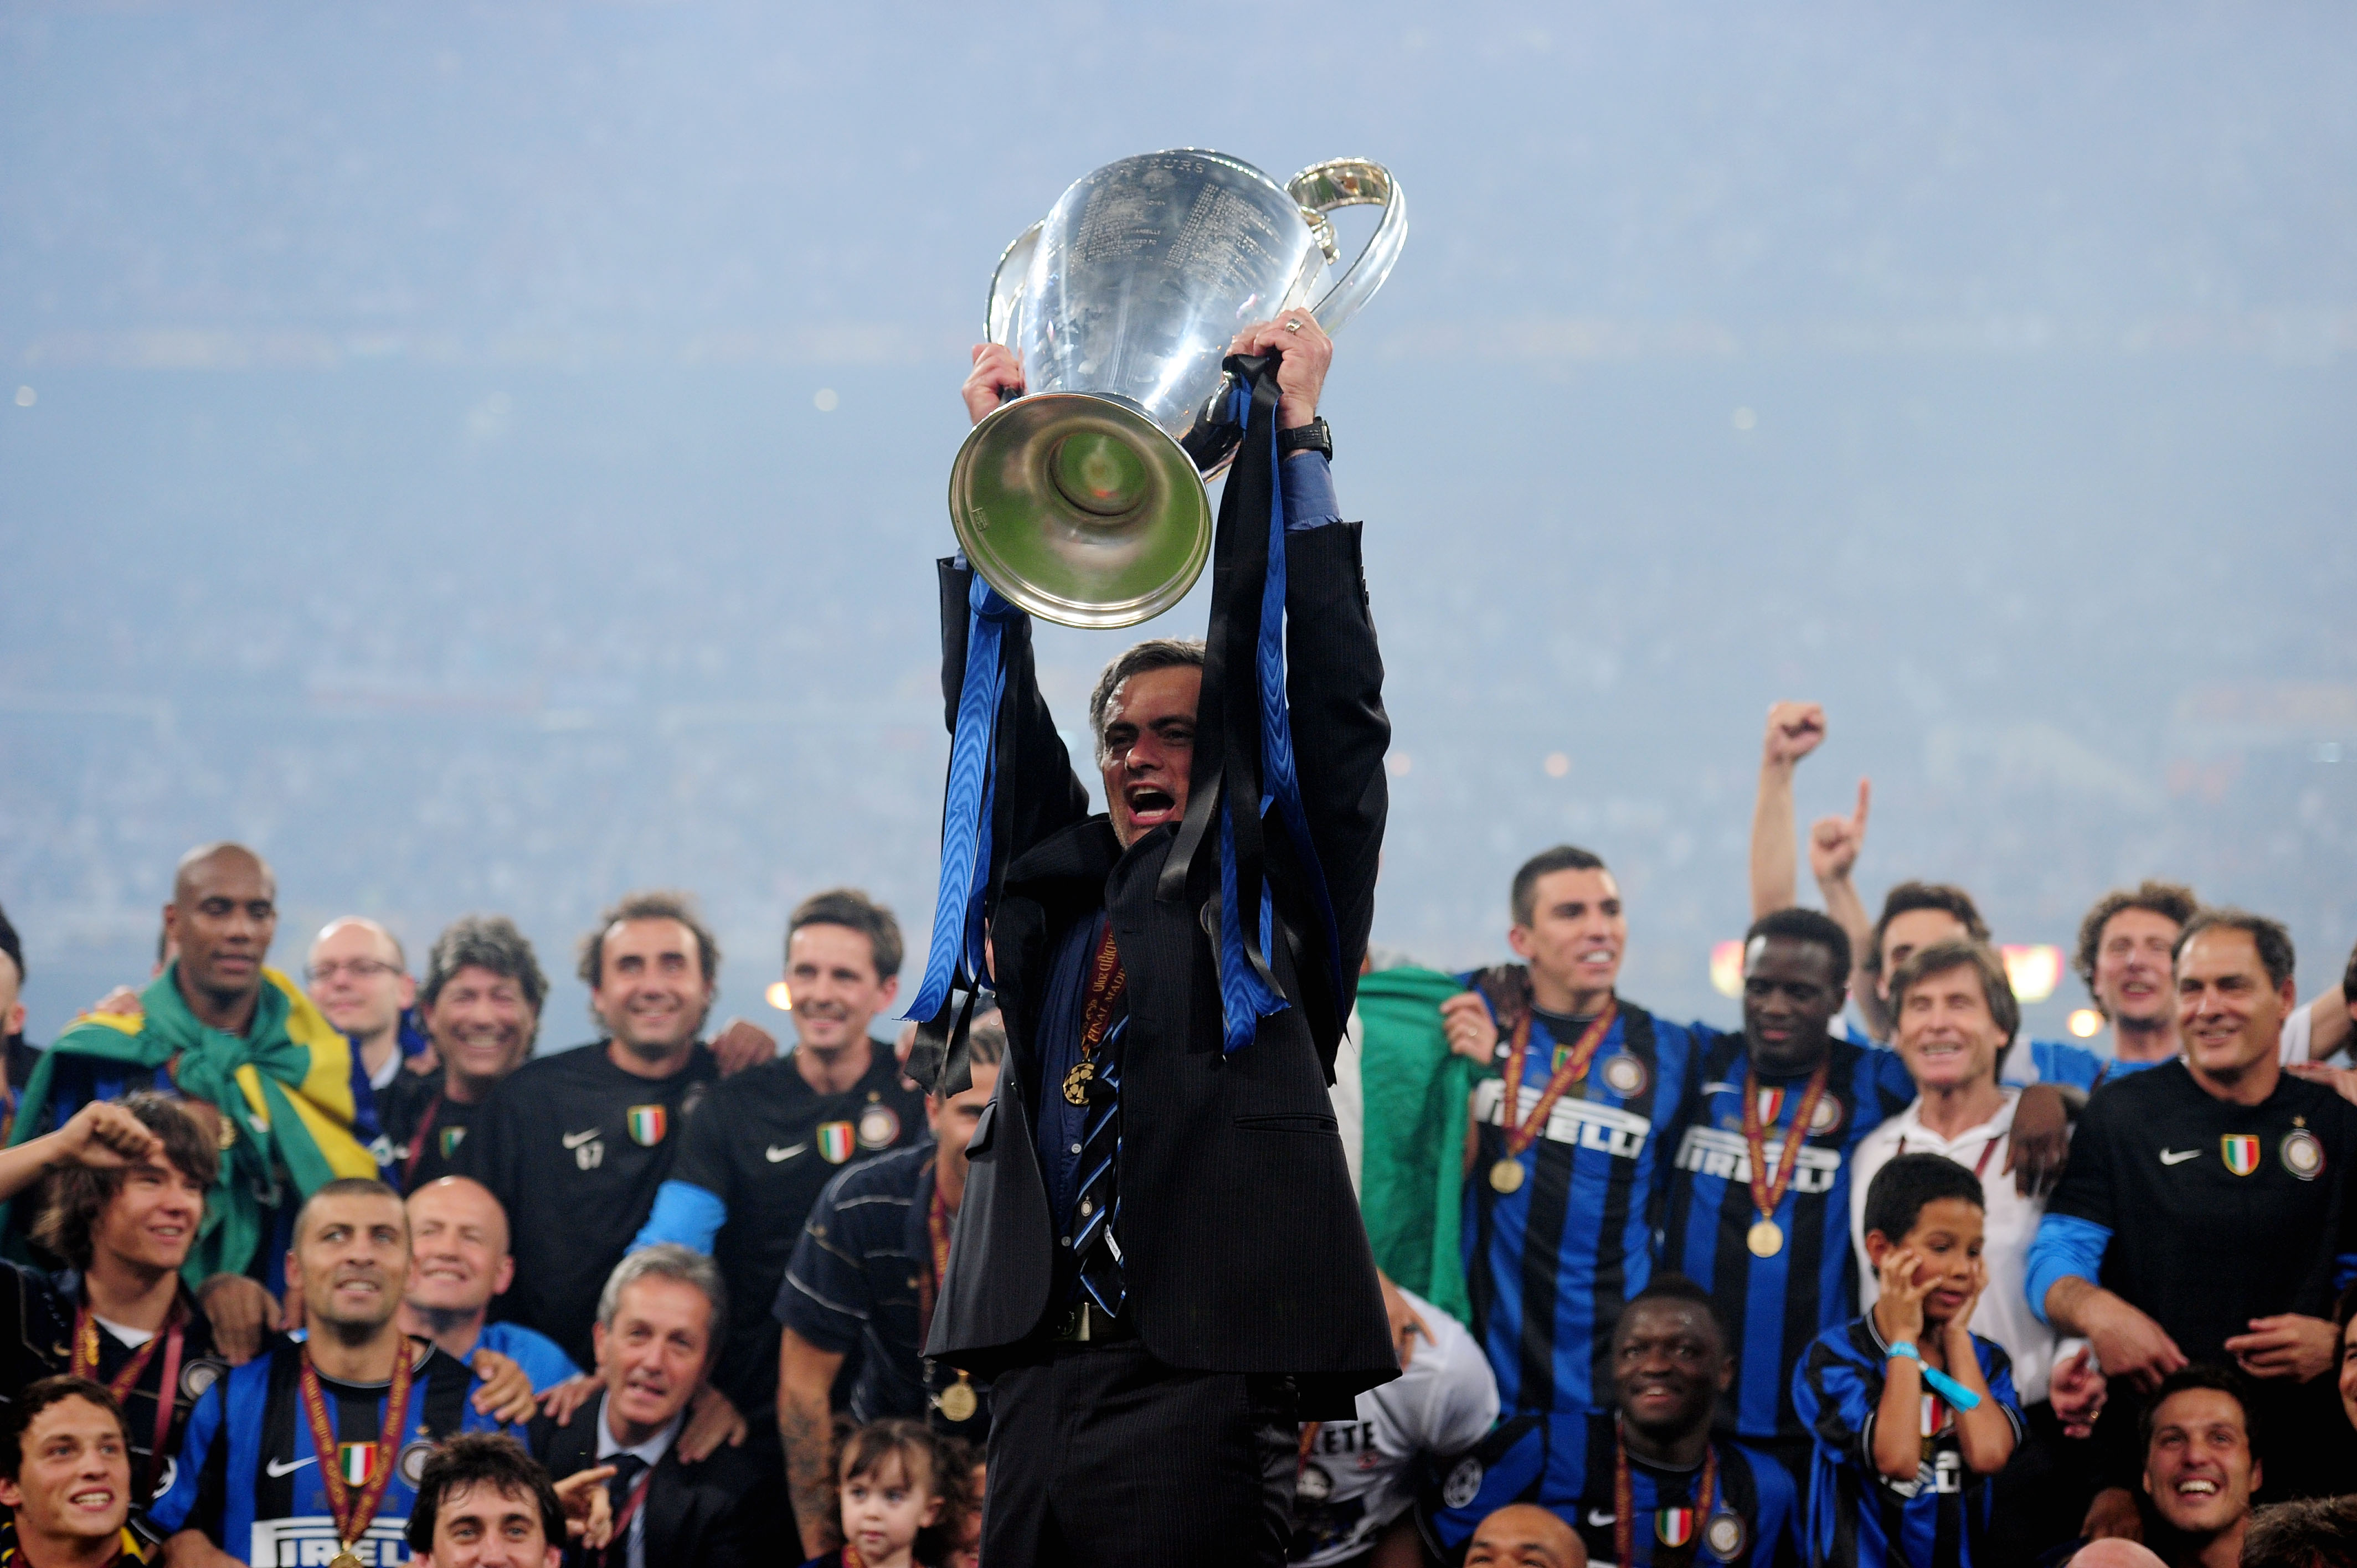 MADRID, SPAIN - MAY 22: Head coach Jose Mourinho of Inter Milan lifts the UEFA Champions League trophy following their team's victory at the end of the UEFA Champions League Final match between FC Bayern Muenchen and Inter Milan at the Estadio Santiago Be